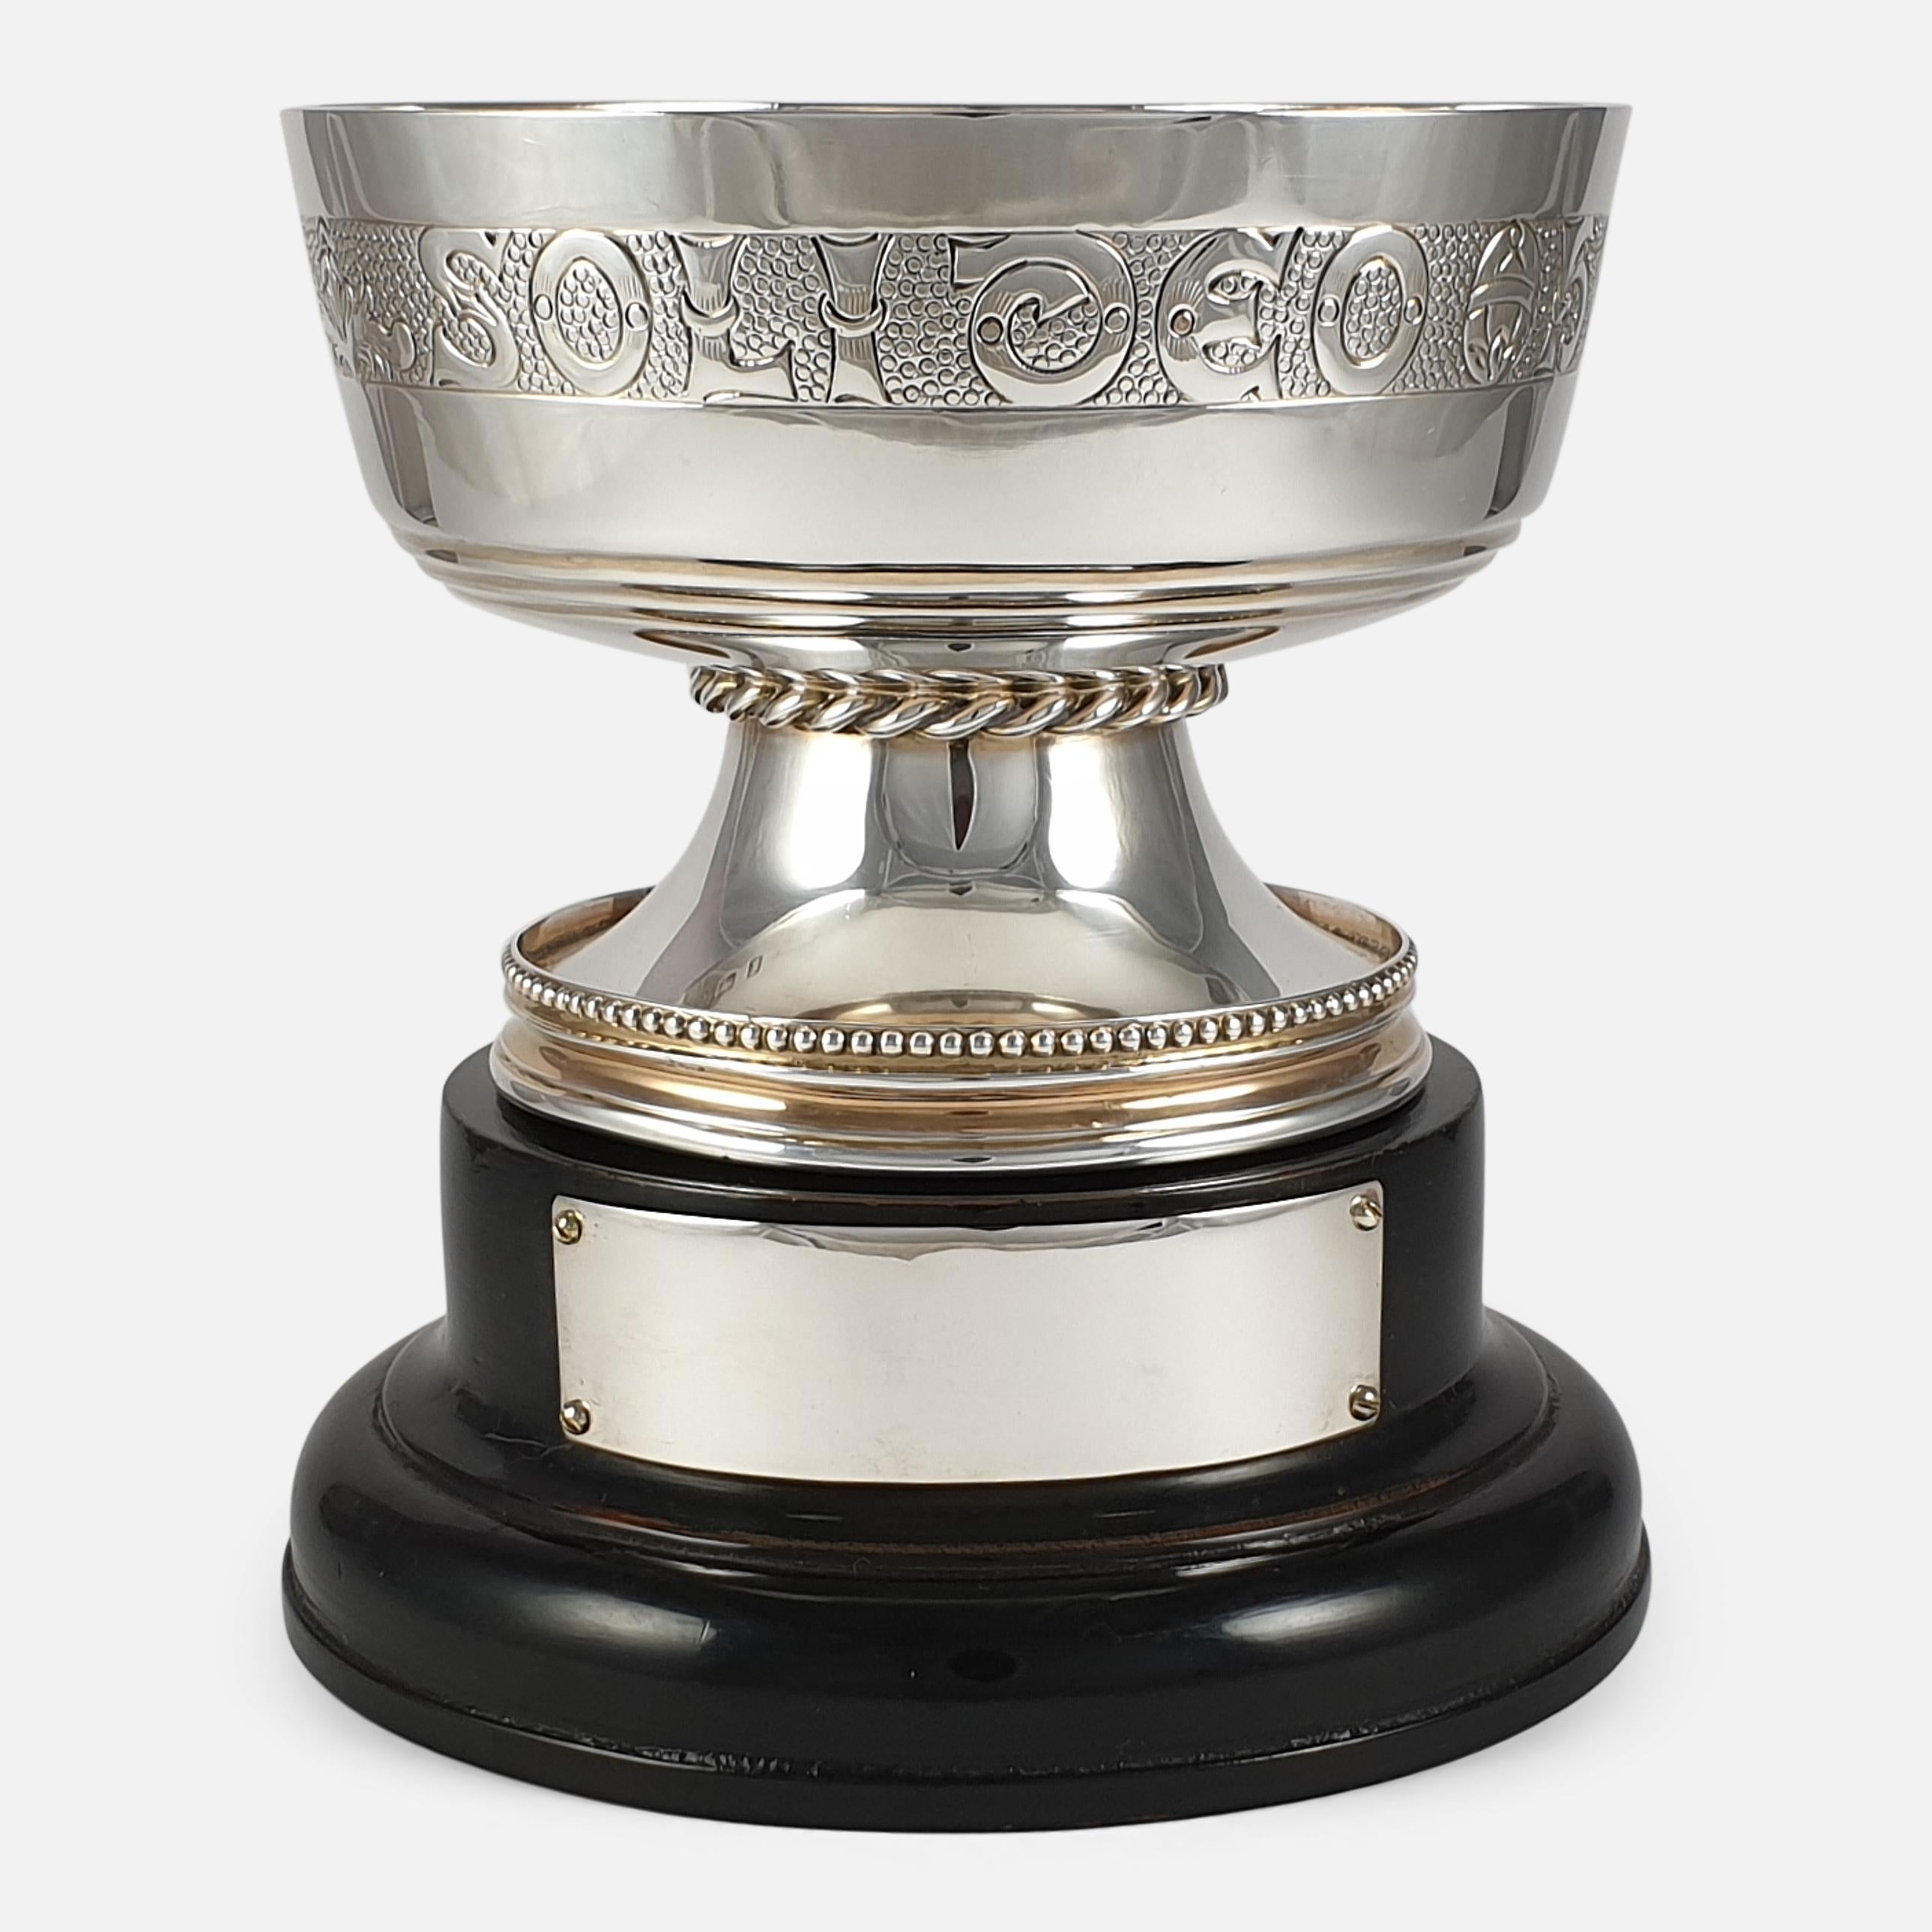 A George V sterling silver gilt replica Tudor chalice cup, and plinth with vacant plaque. The cup is of circular form, with a chased inscription on a matted background, the tapering foot with a rope-work girdle and chased border. The cup is crafted